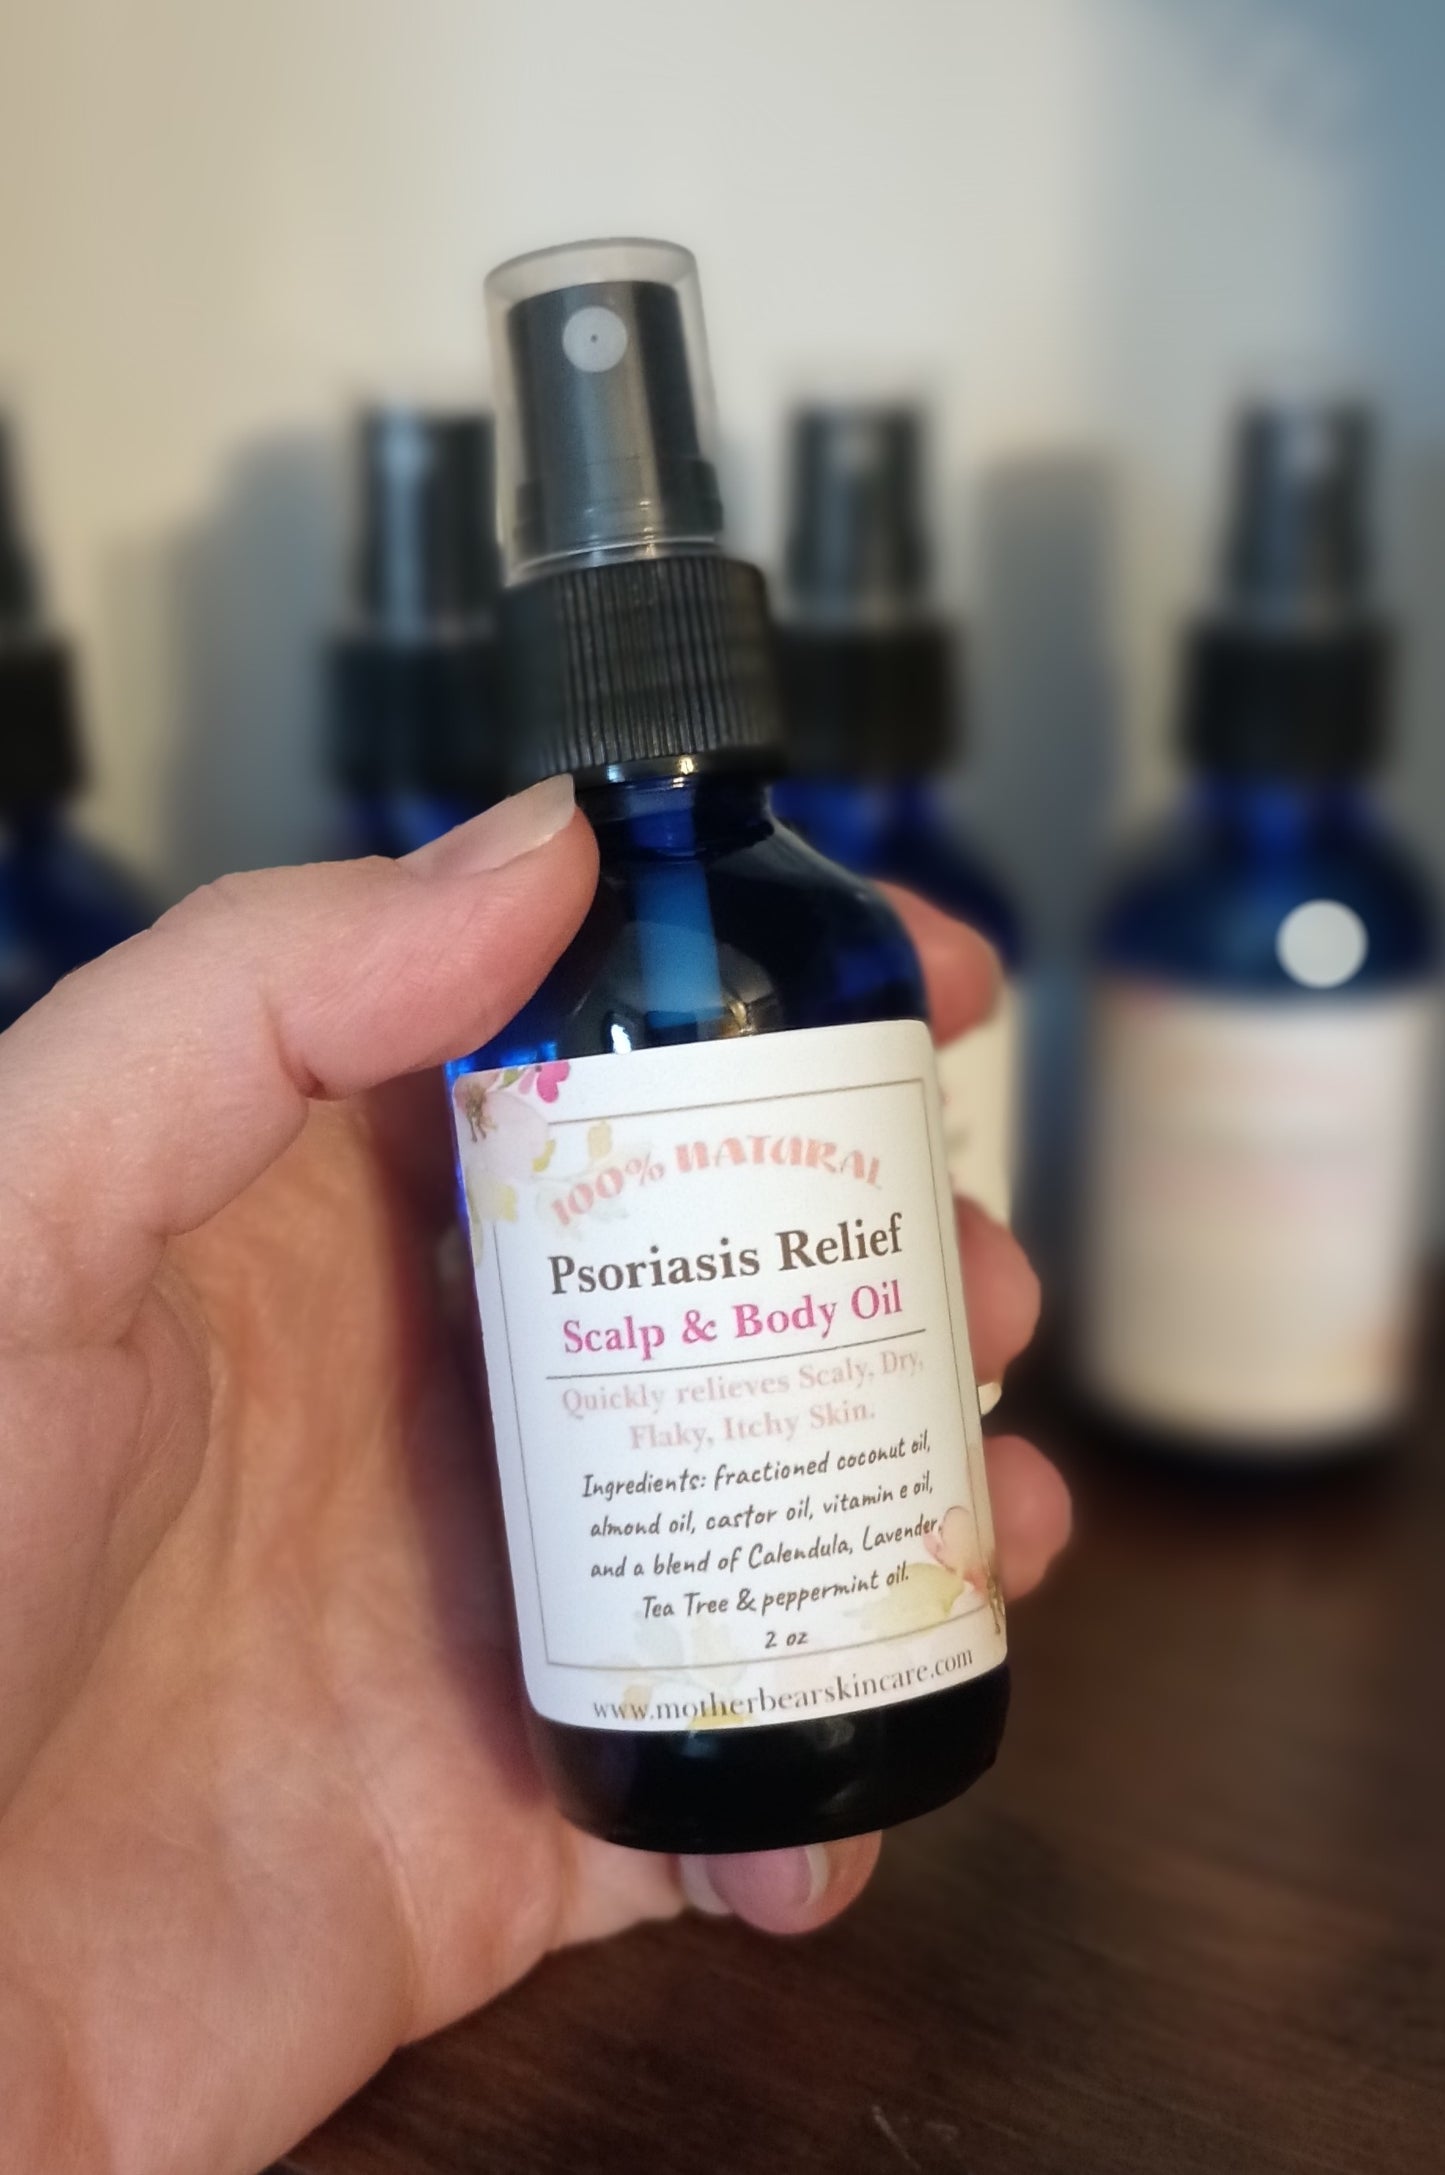 All-Natural Psoriasis Relief Scalp & Body Oil